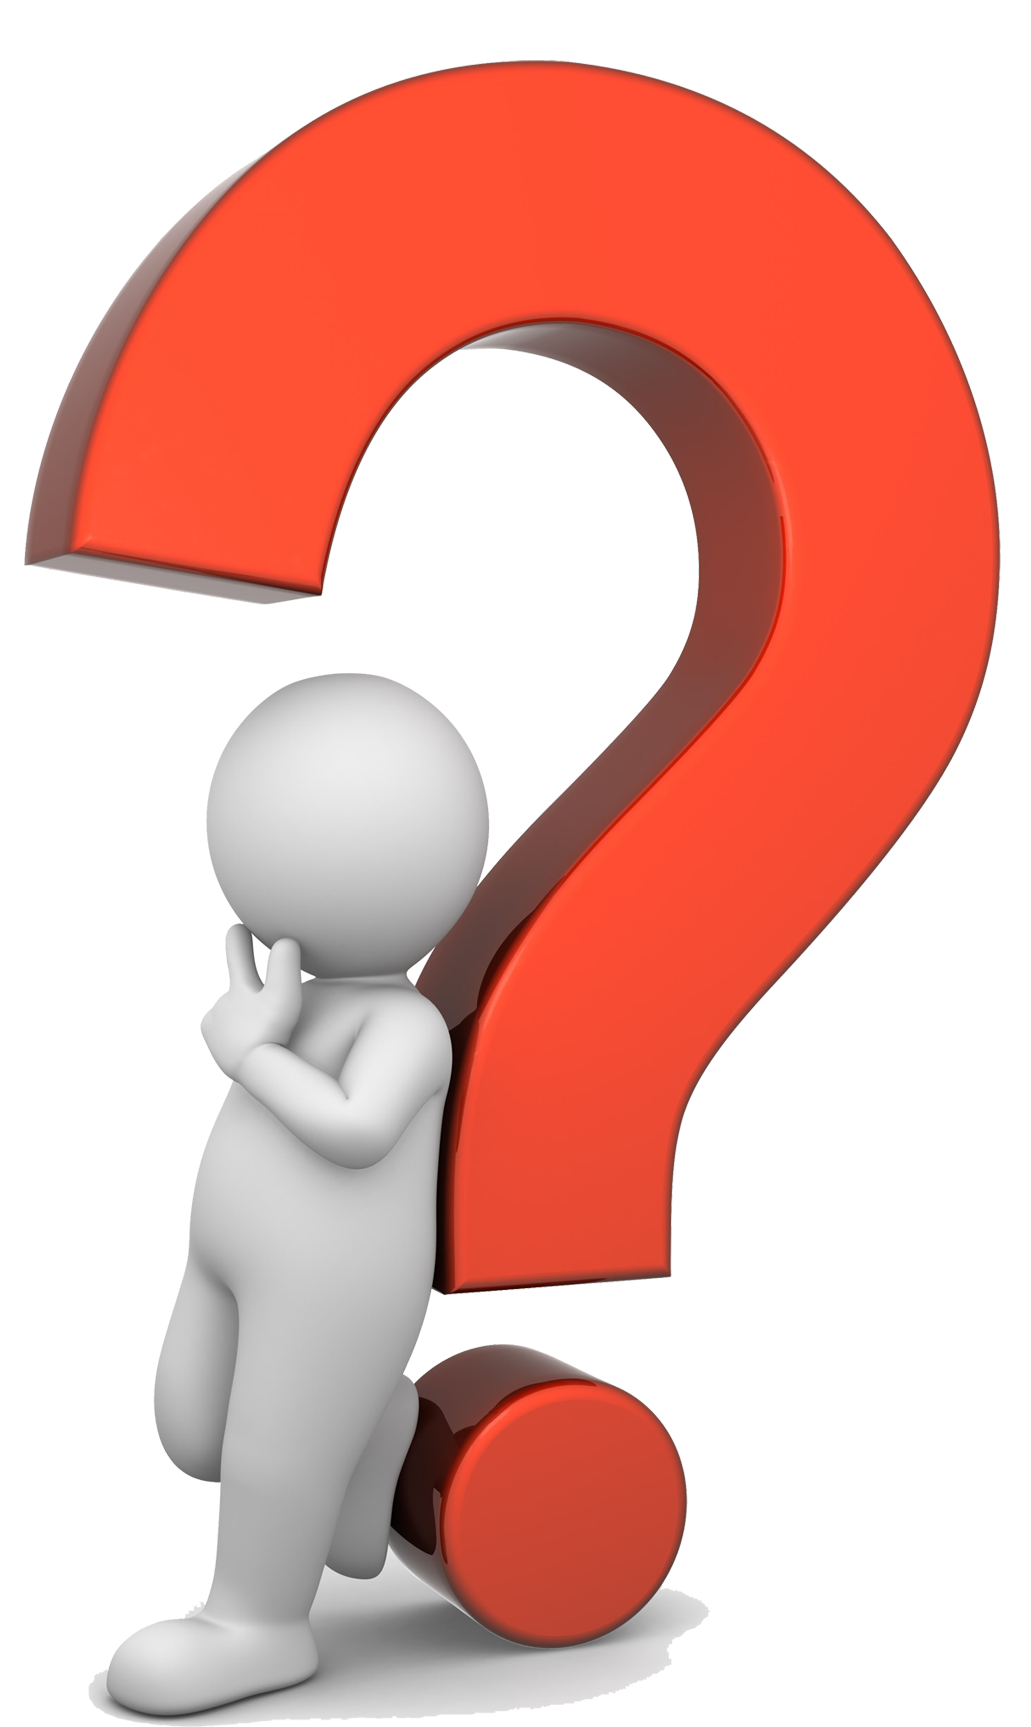 question mark logo png